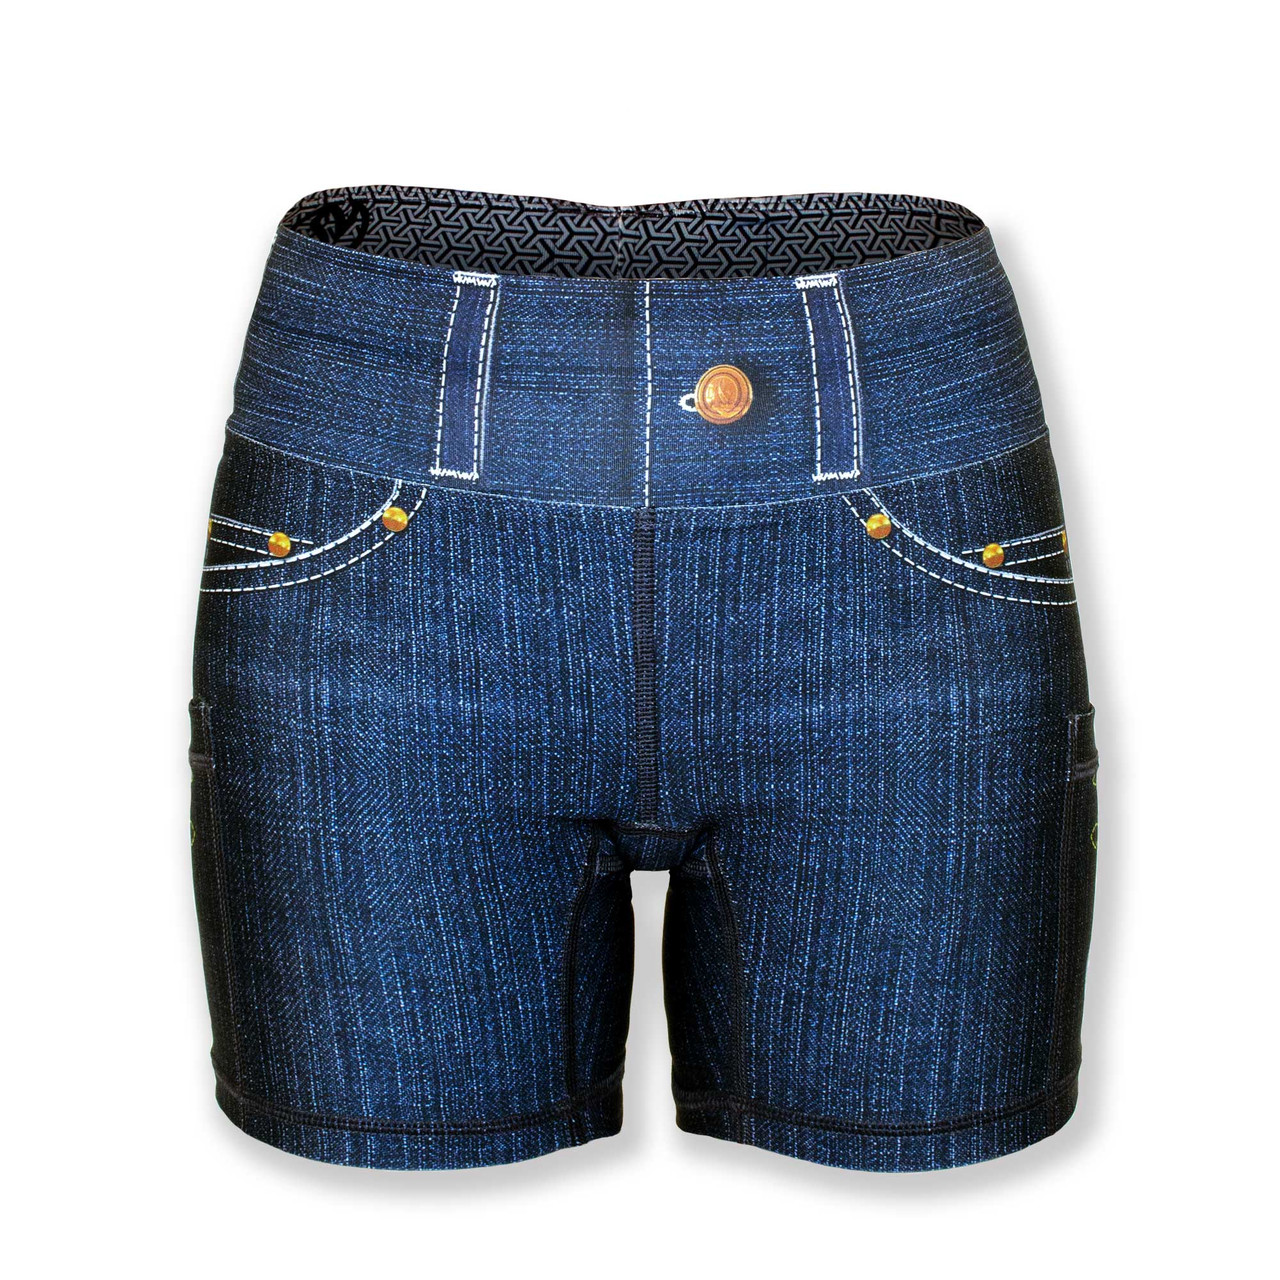 Buy BLUE Shorts for Women by Deal Jeans Online